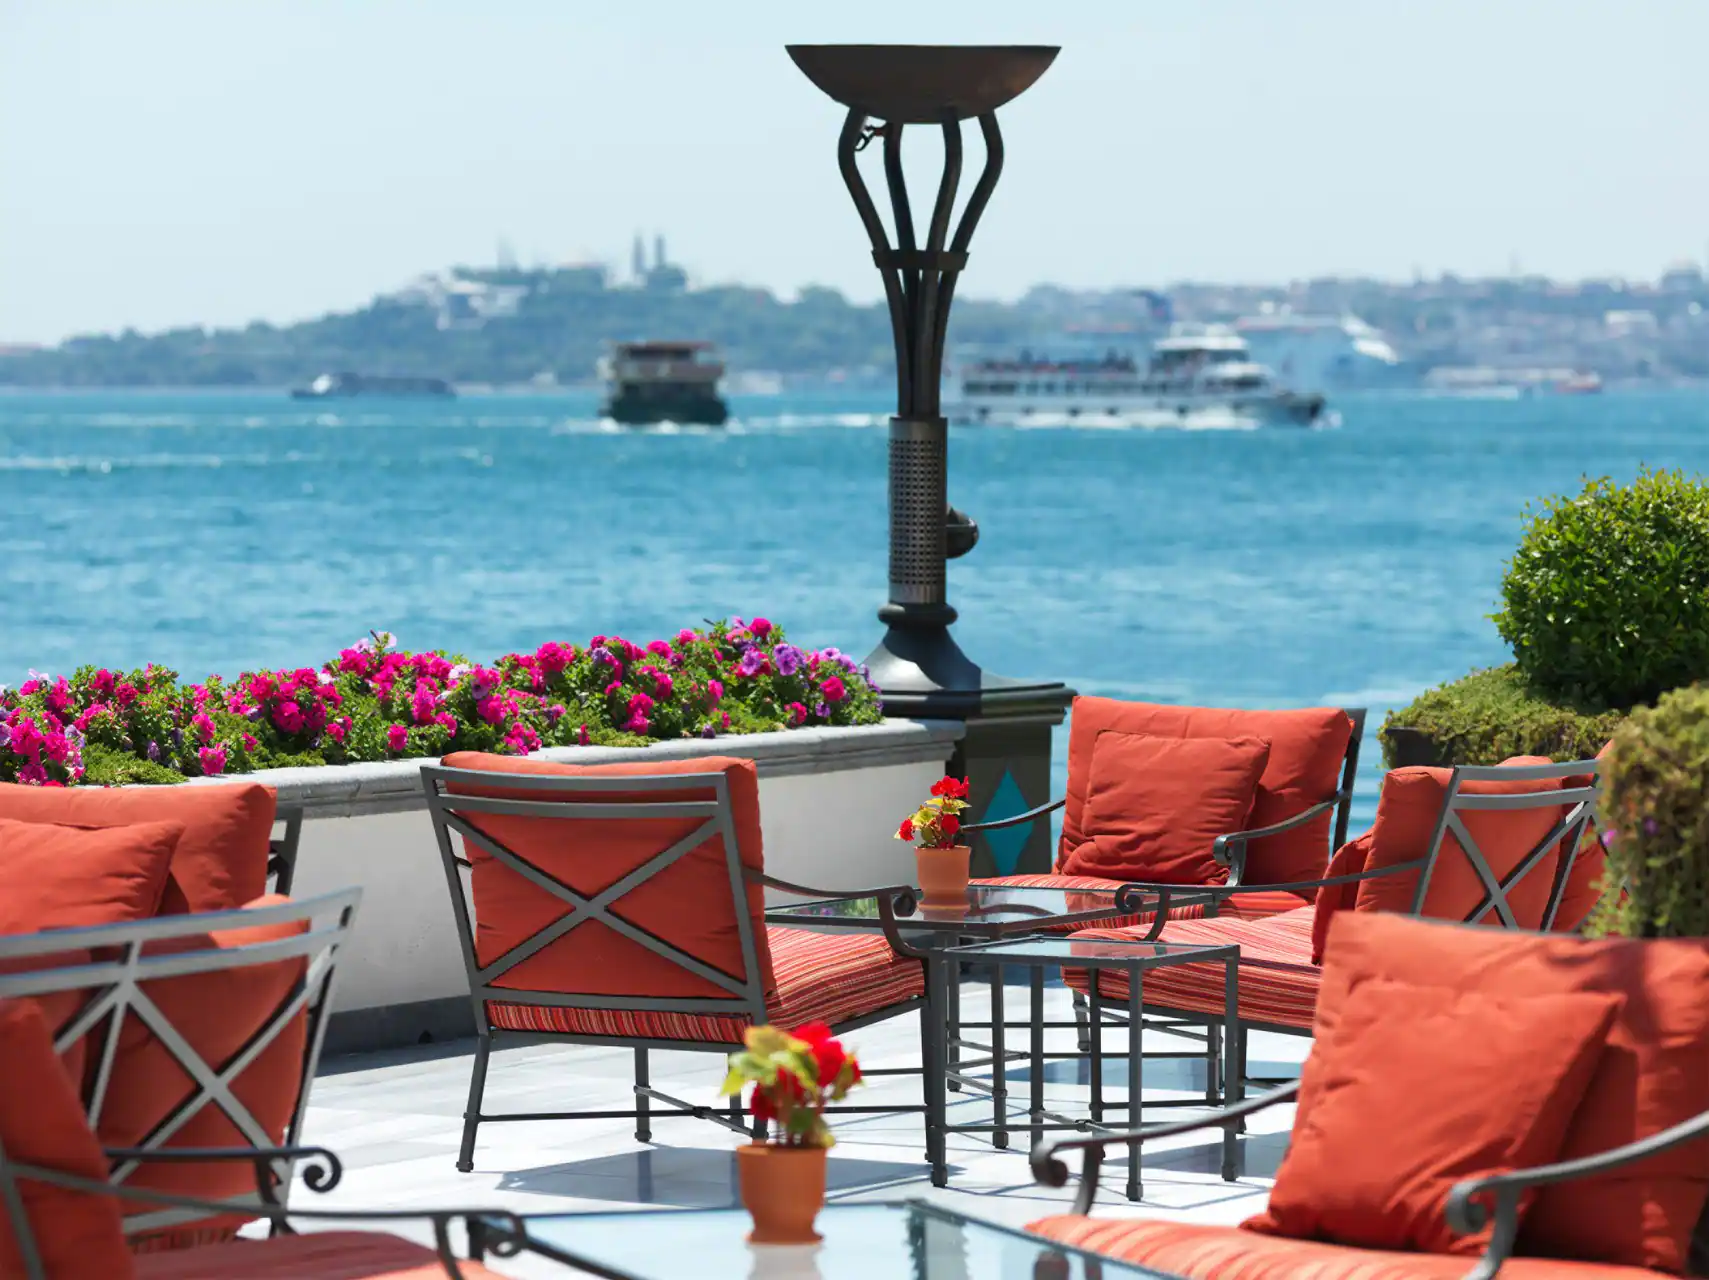 LUXE INFINITY – FOUR SEAONS ISTANBUL FACE AU BOSPHORE LE TEMPS S’ÉTIRE 